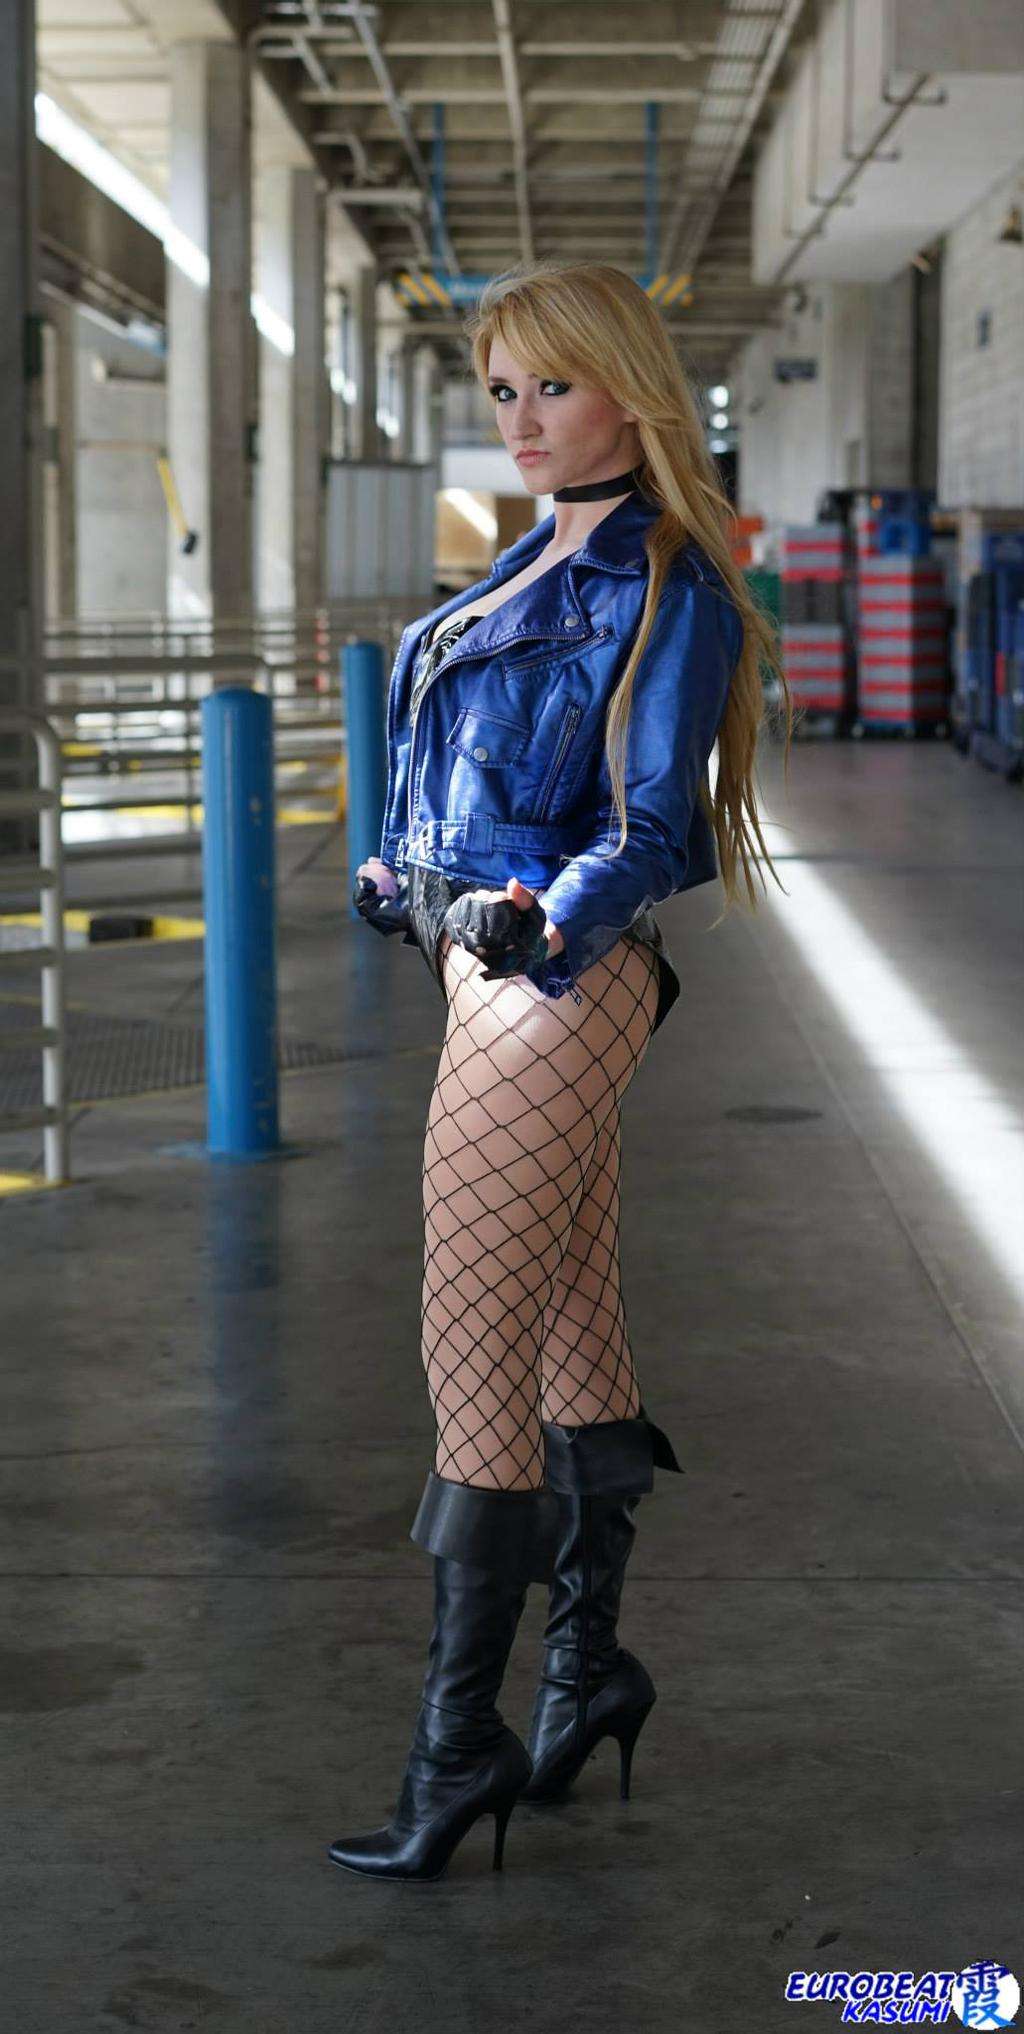 51 Hot Pictures Of Black Canary From DC Comics | Best Of Comic Books